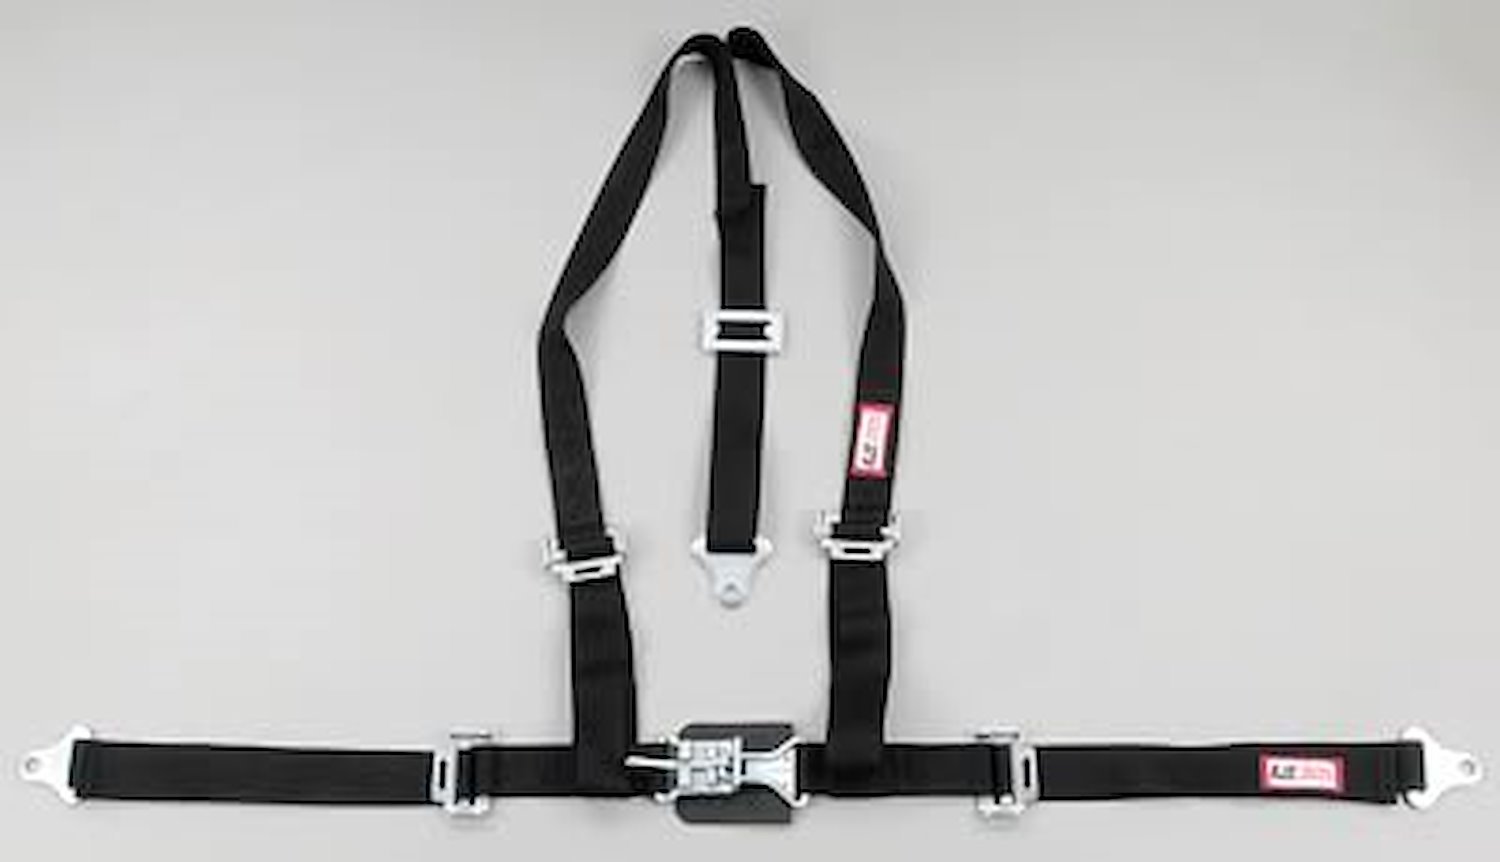 NON-SFI L&L HARNESS 2 PULL UP Lap Belt SEWN IN 2 S.H. V ROLL BAR Mount w/STERNUM STRAP ALL SNAP ENDS GRAY